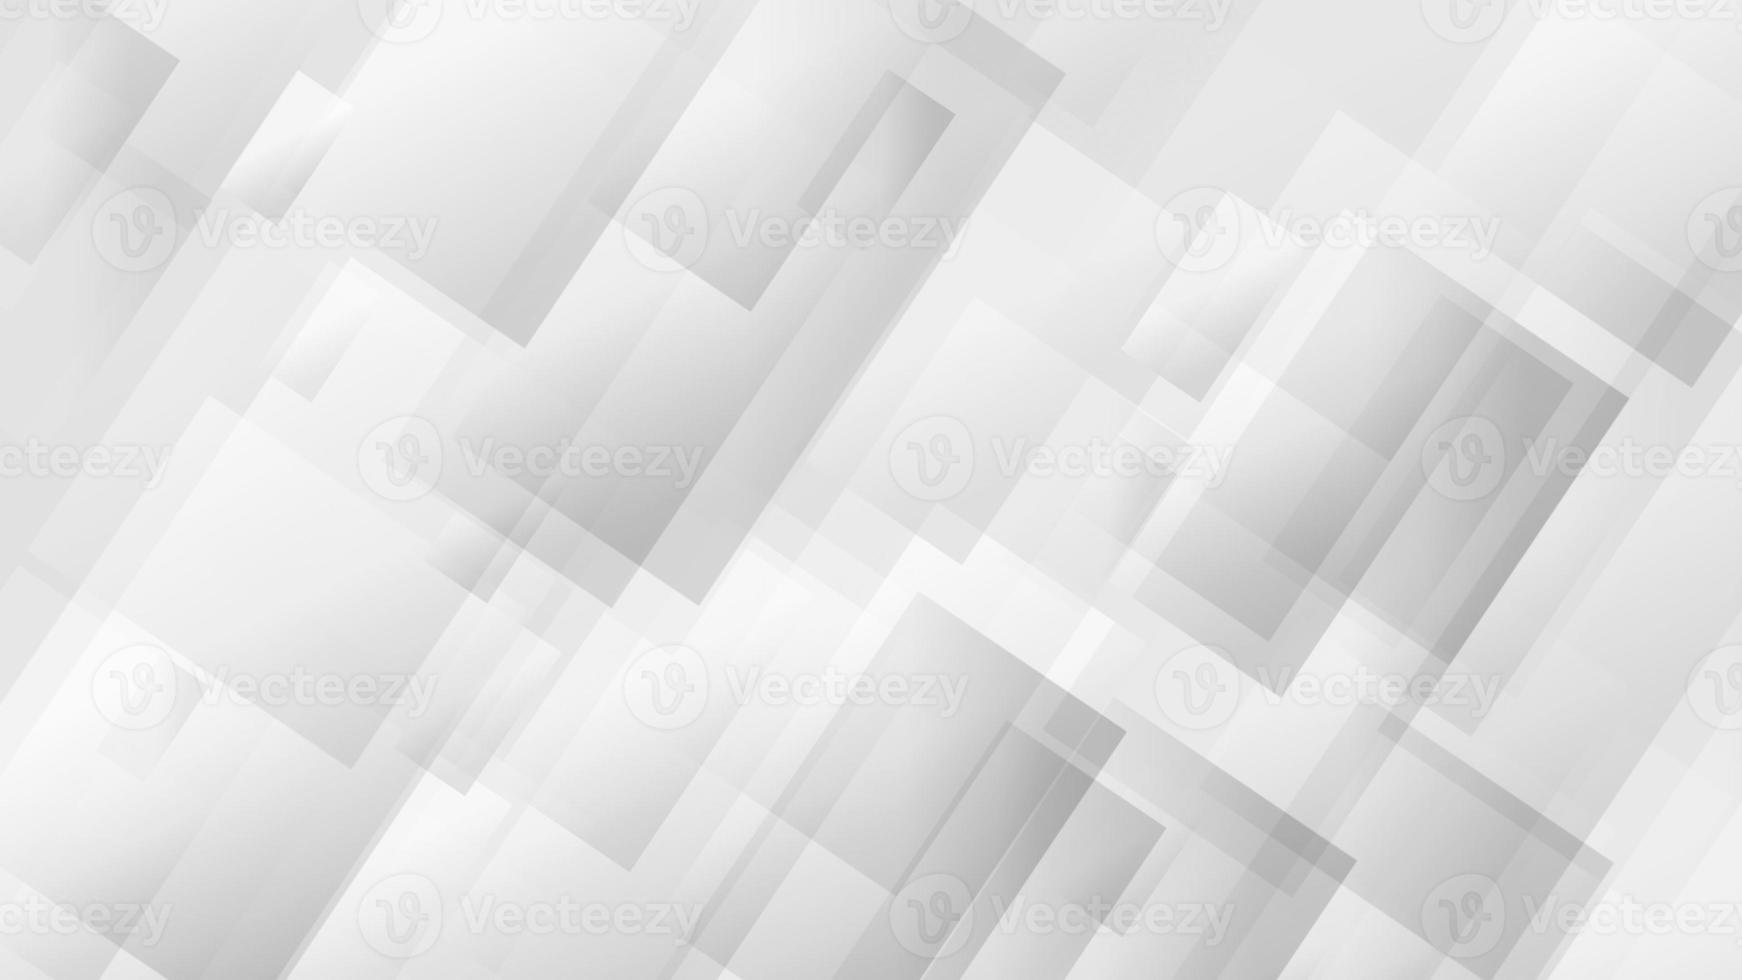 4K Digital Square Moving Abstract Clean Corporate Background Seamless Loop - Gray,White photo